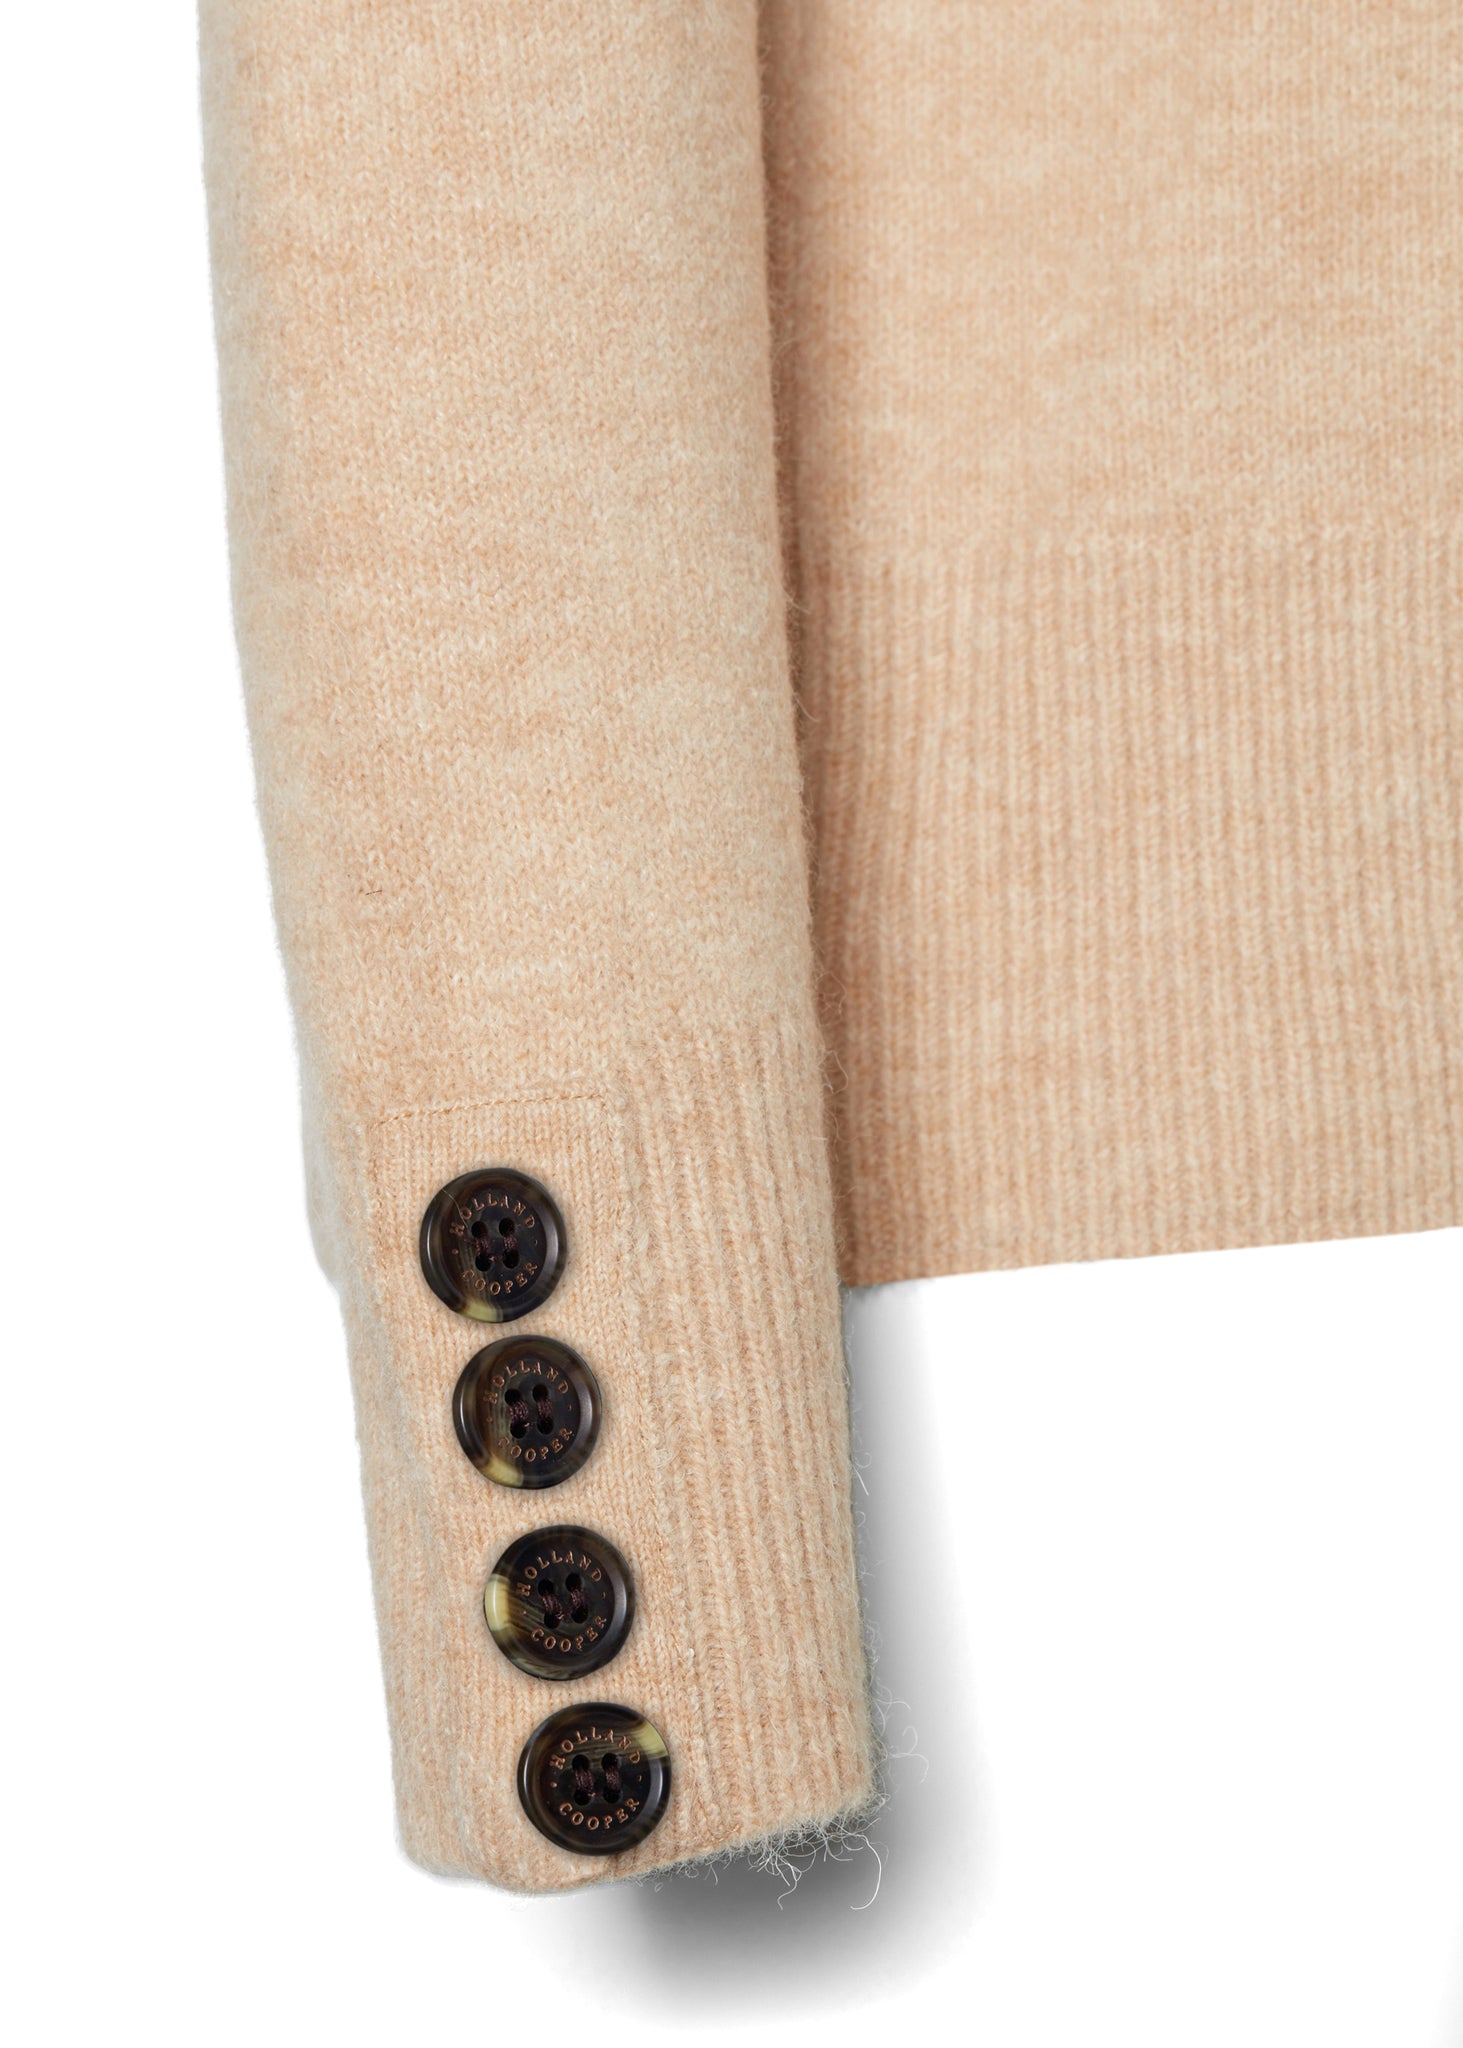 horn button detail across cuffs of womens chunky knit crew neck jumper in camel with half cable knit knit detailing and horn buttons across cuffs